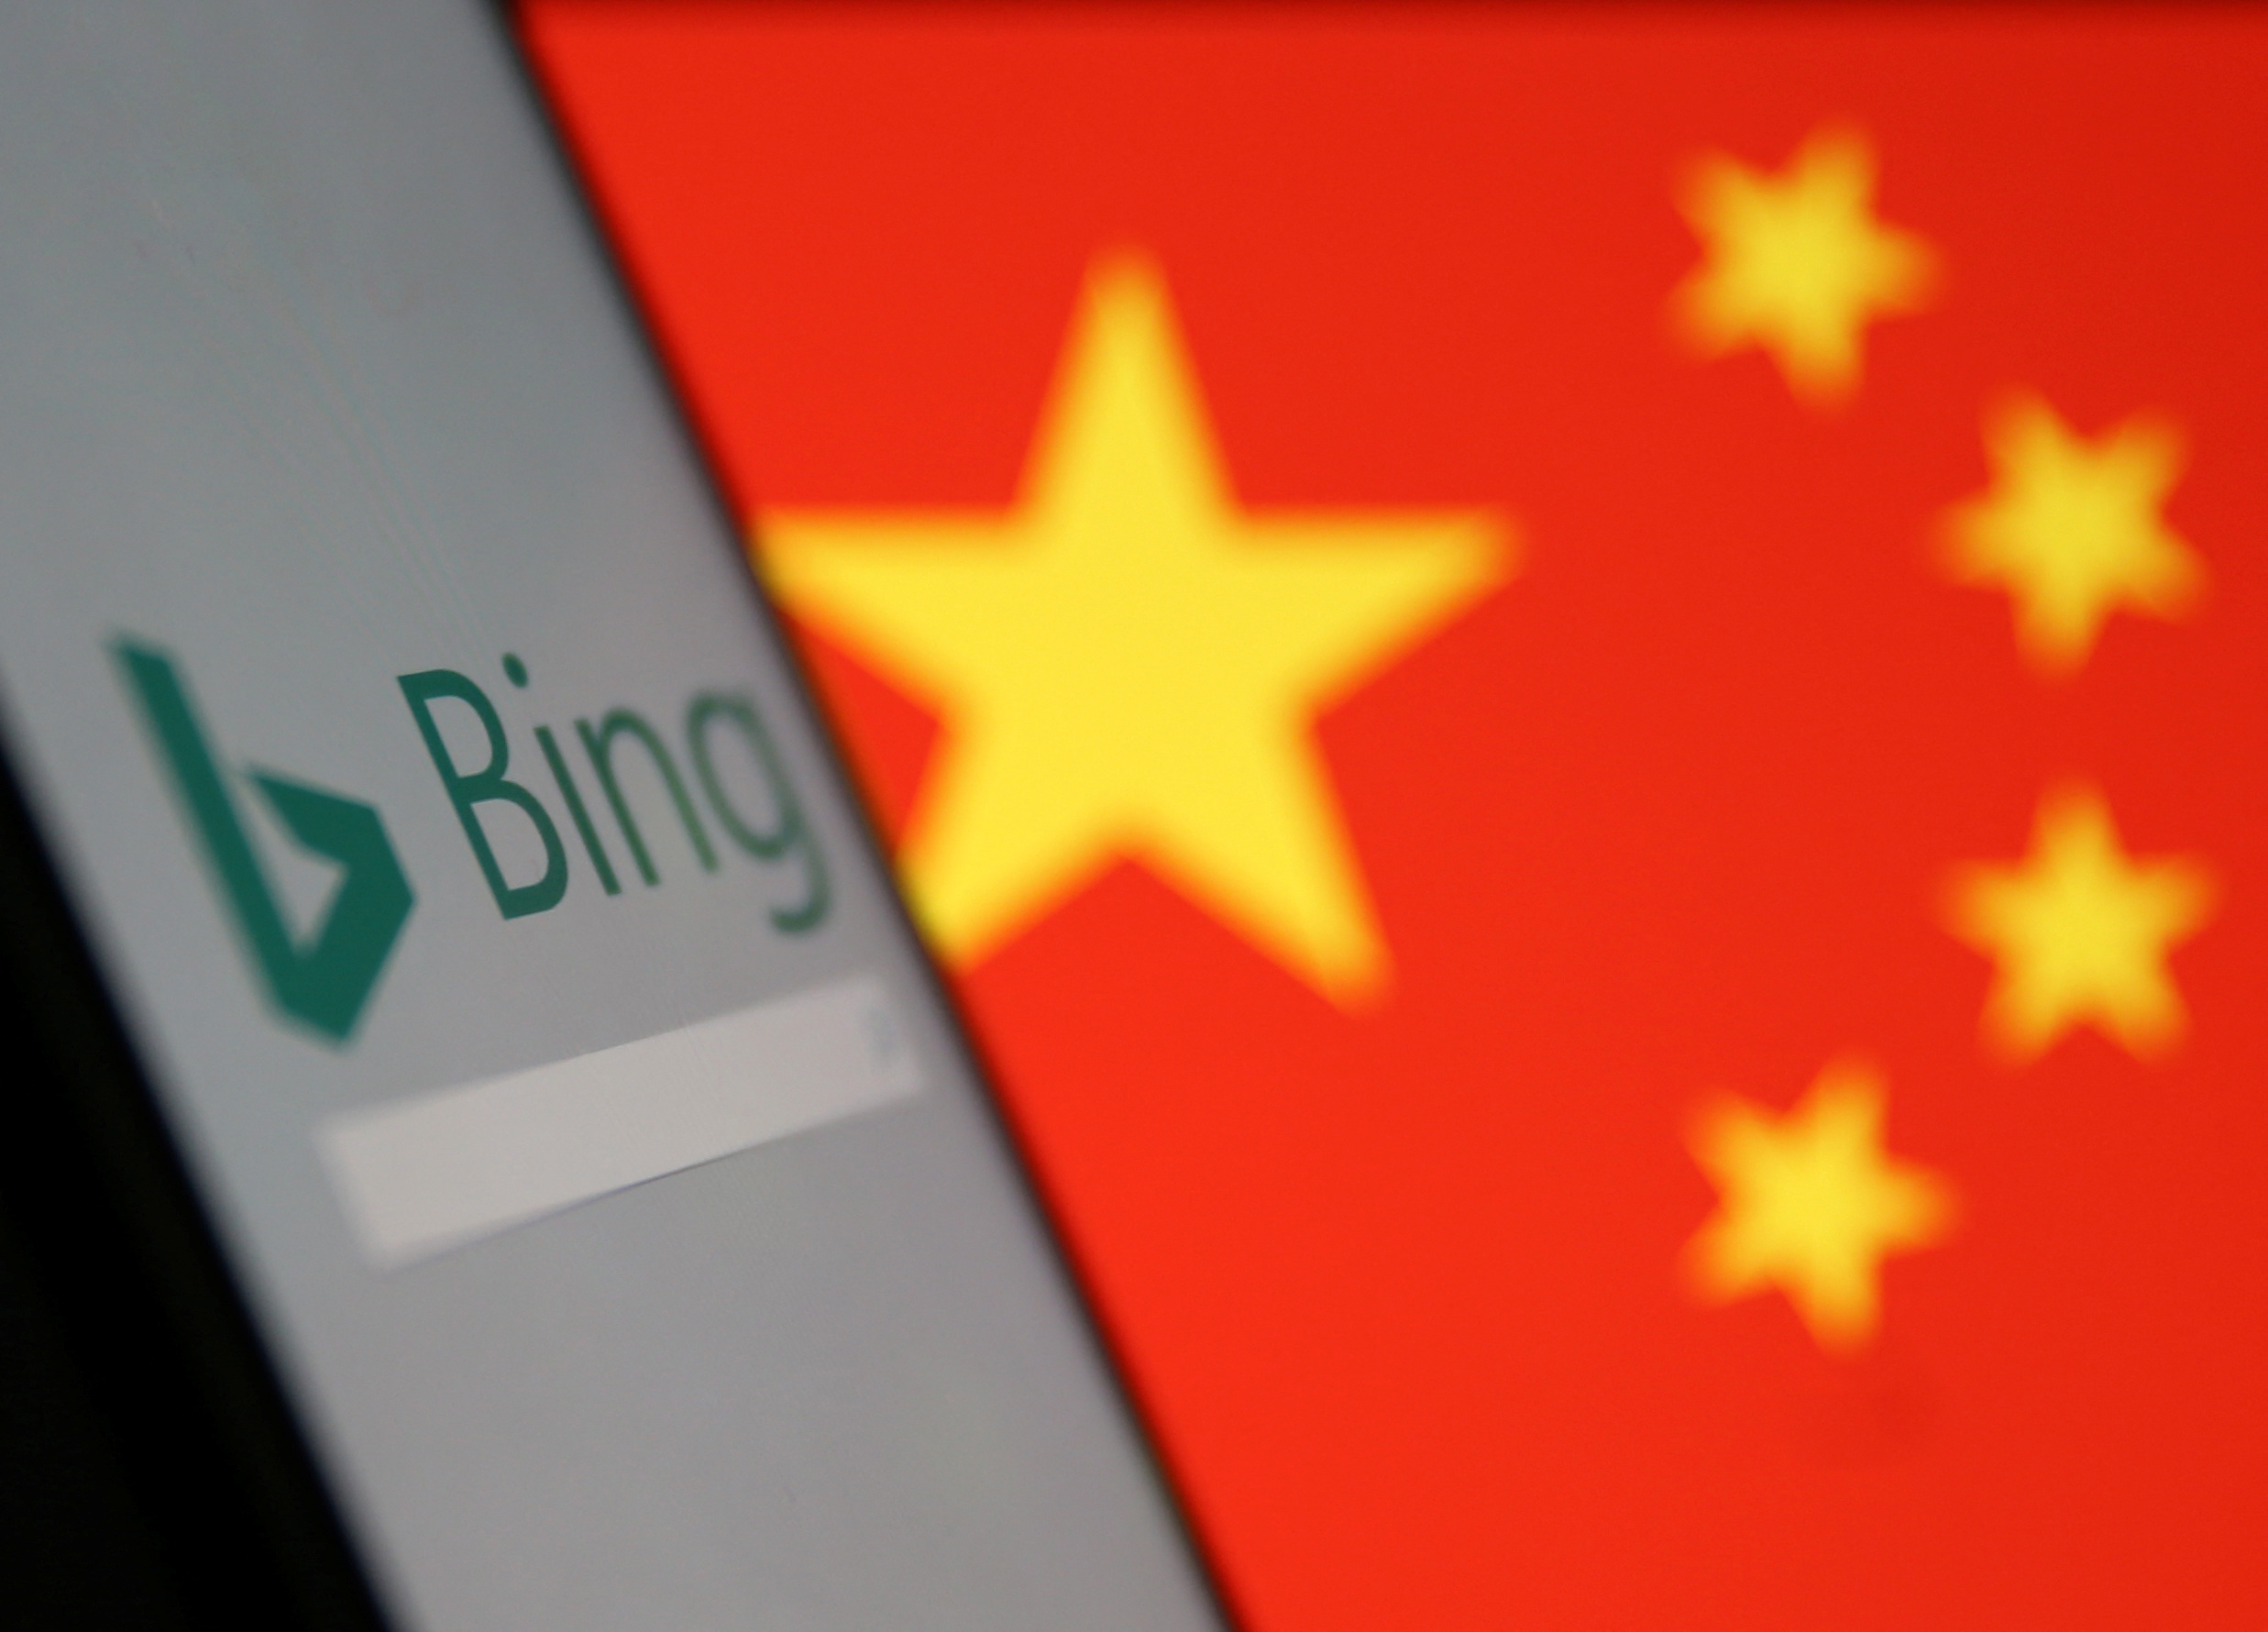 A smartphone with the Microsoft Bing logo is displayed against the backdrop of a Chinese flag in this picture illustration